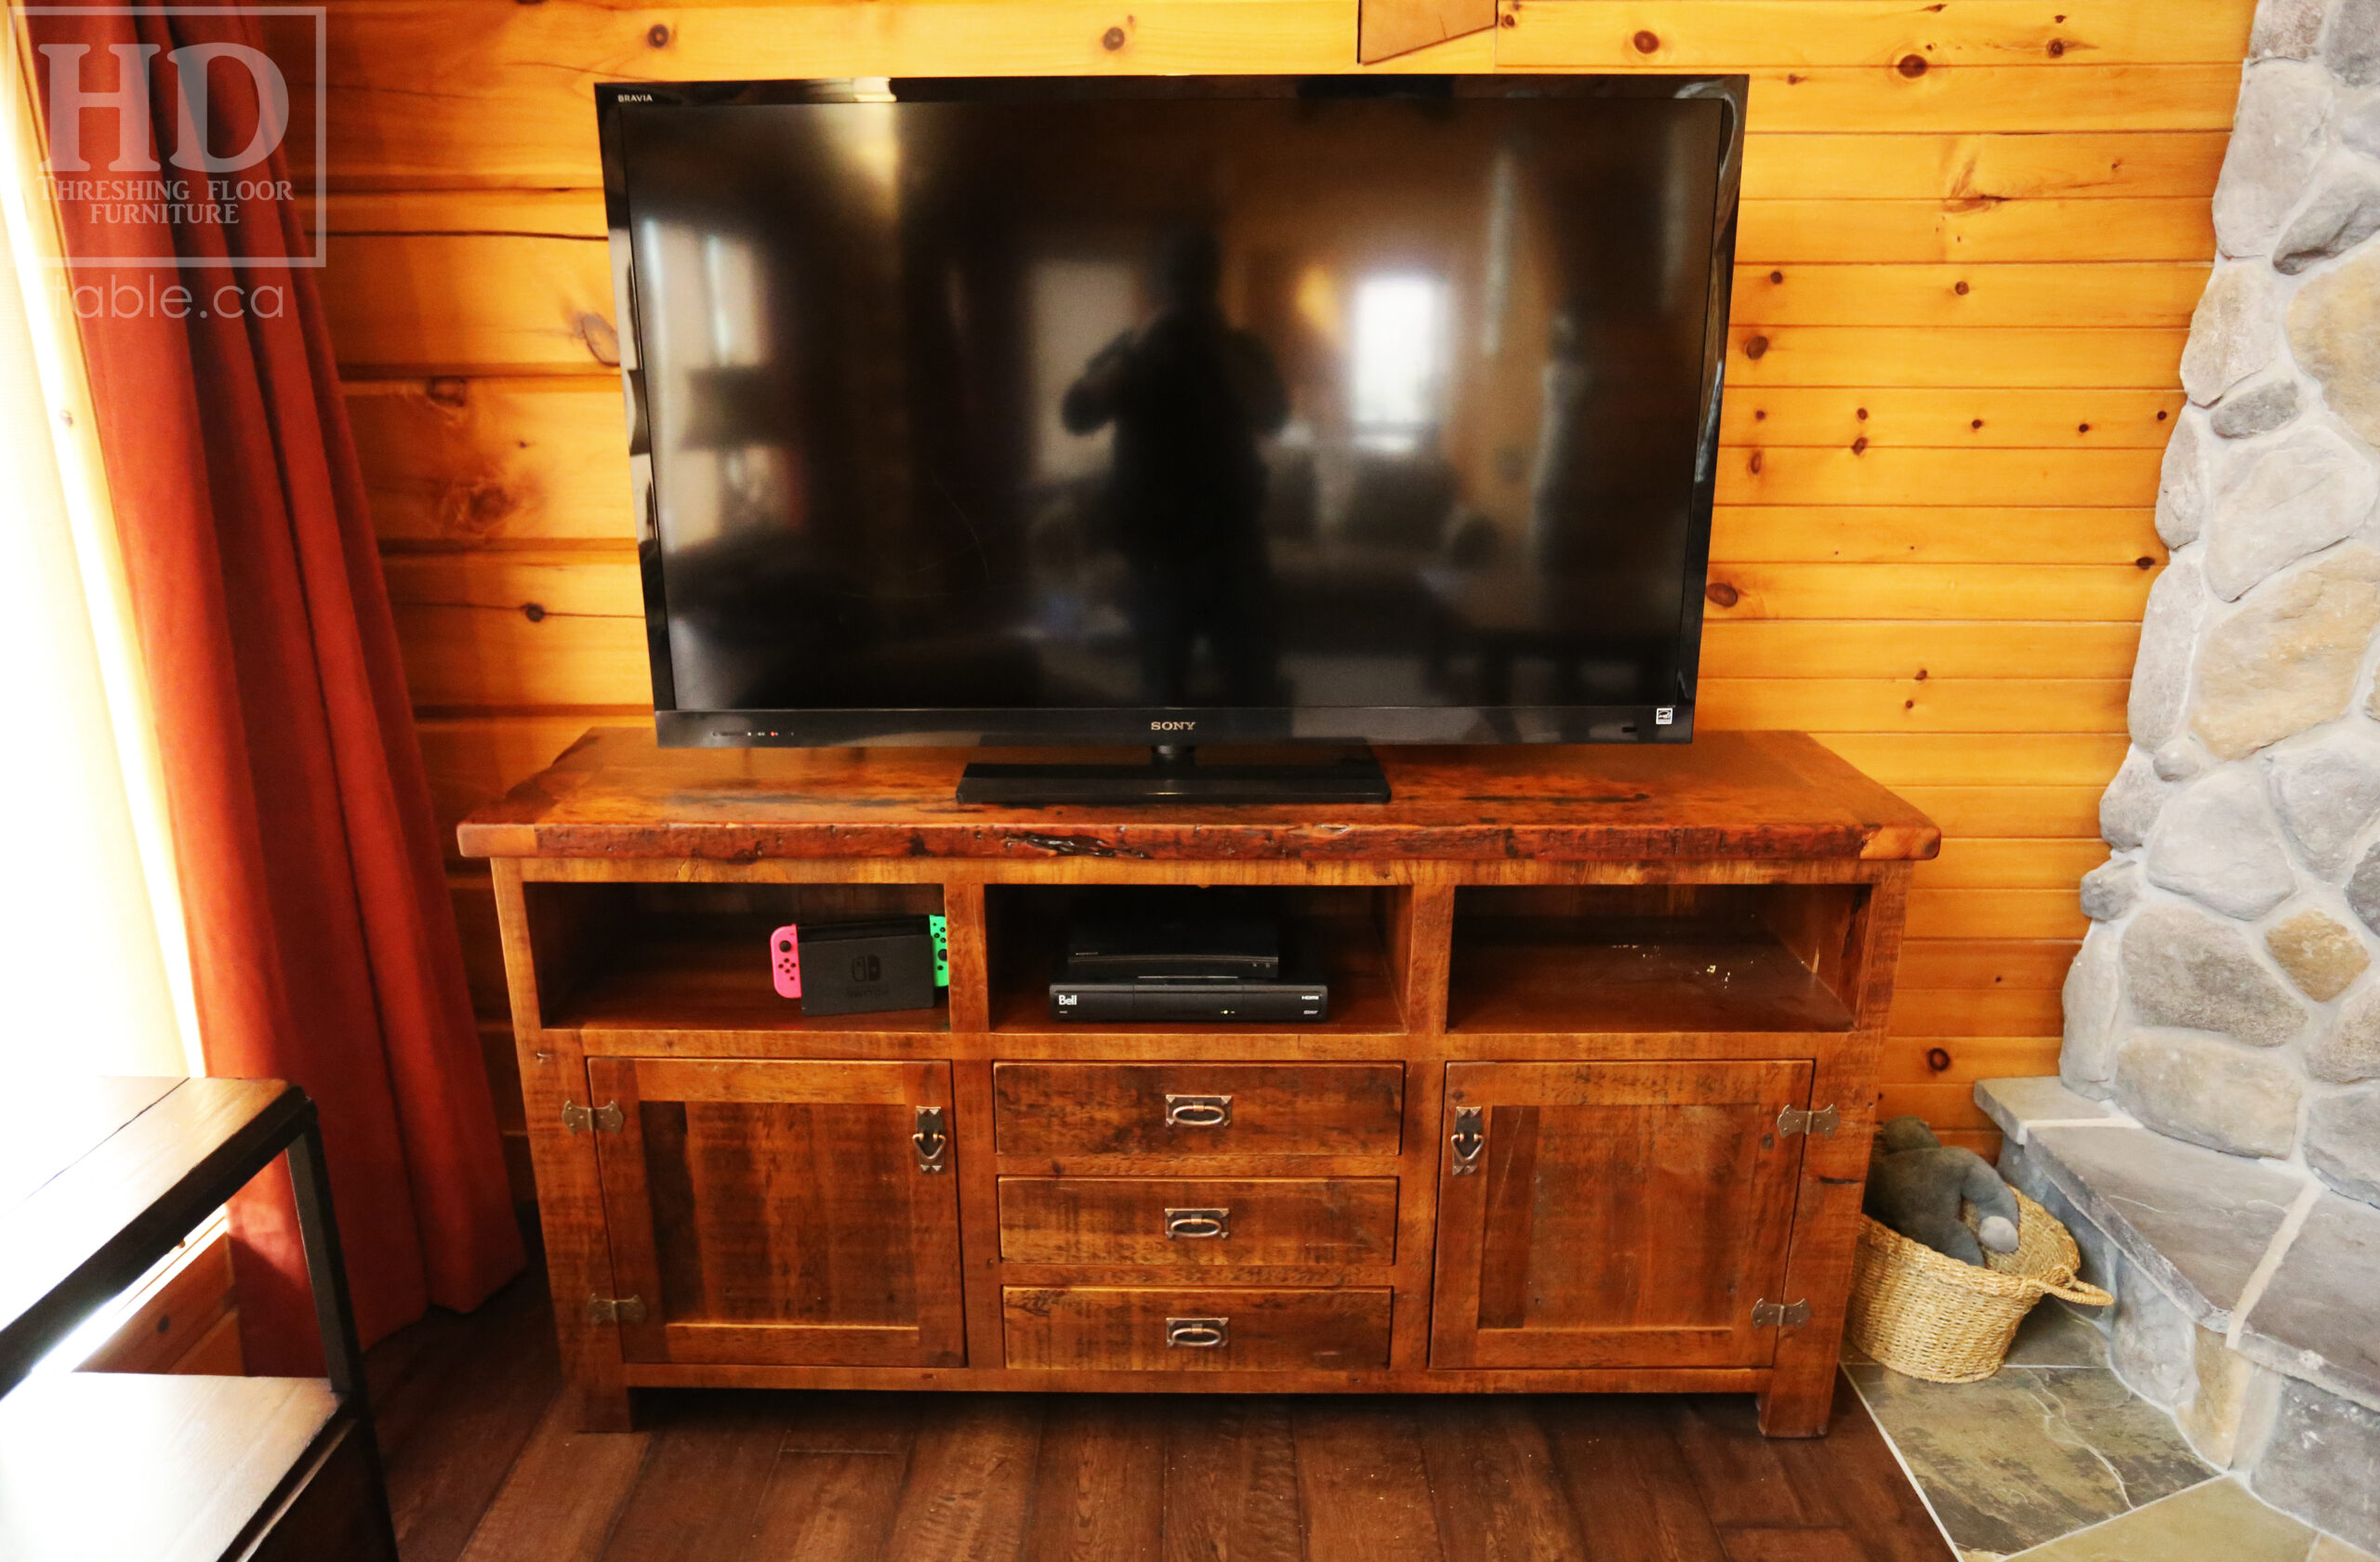 6’ Reclaimed Ontario Barnwood TV Unit we made for a Vienna, Ontario home – 18” deep – 36” height – Open Shelving – Centre 3 Drawers / 2 Outside Bottom Doors - Old Growth Pine Threshing Floor & Grainery Board Construction - Original edges & distressing maintained – Bread Edge Board Ends – Premium epoxy + matte polyurethane finish – Mission Cast Brass Lee Valley Hardware - www.table.ca